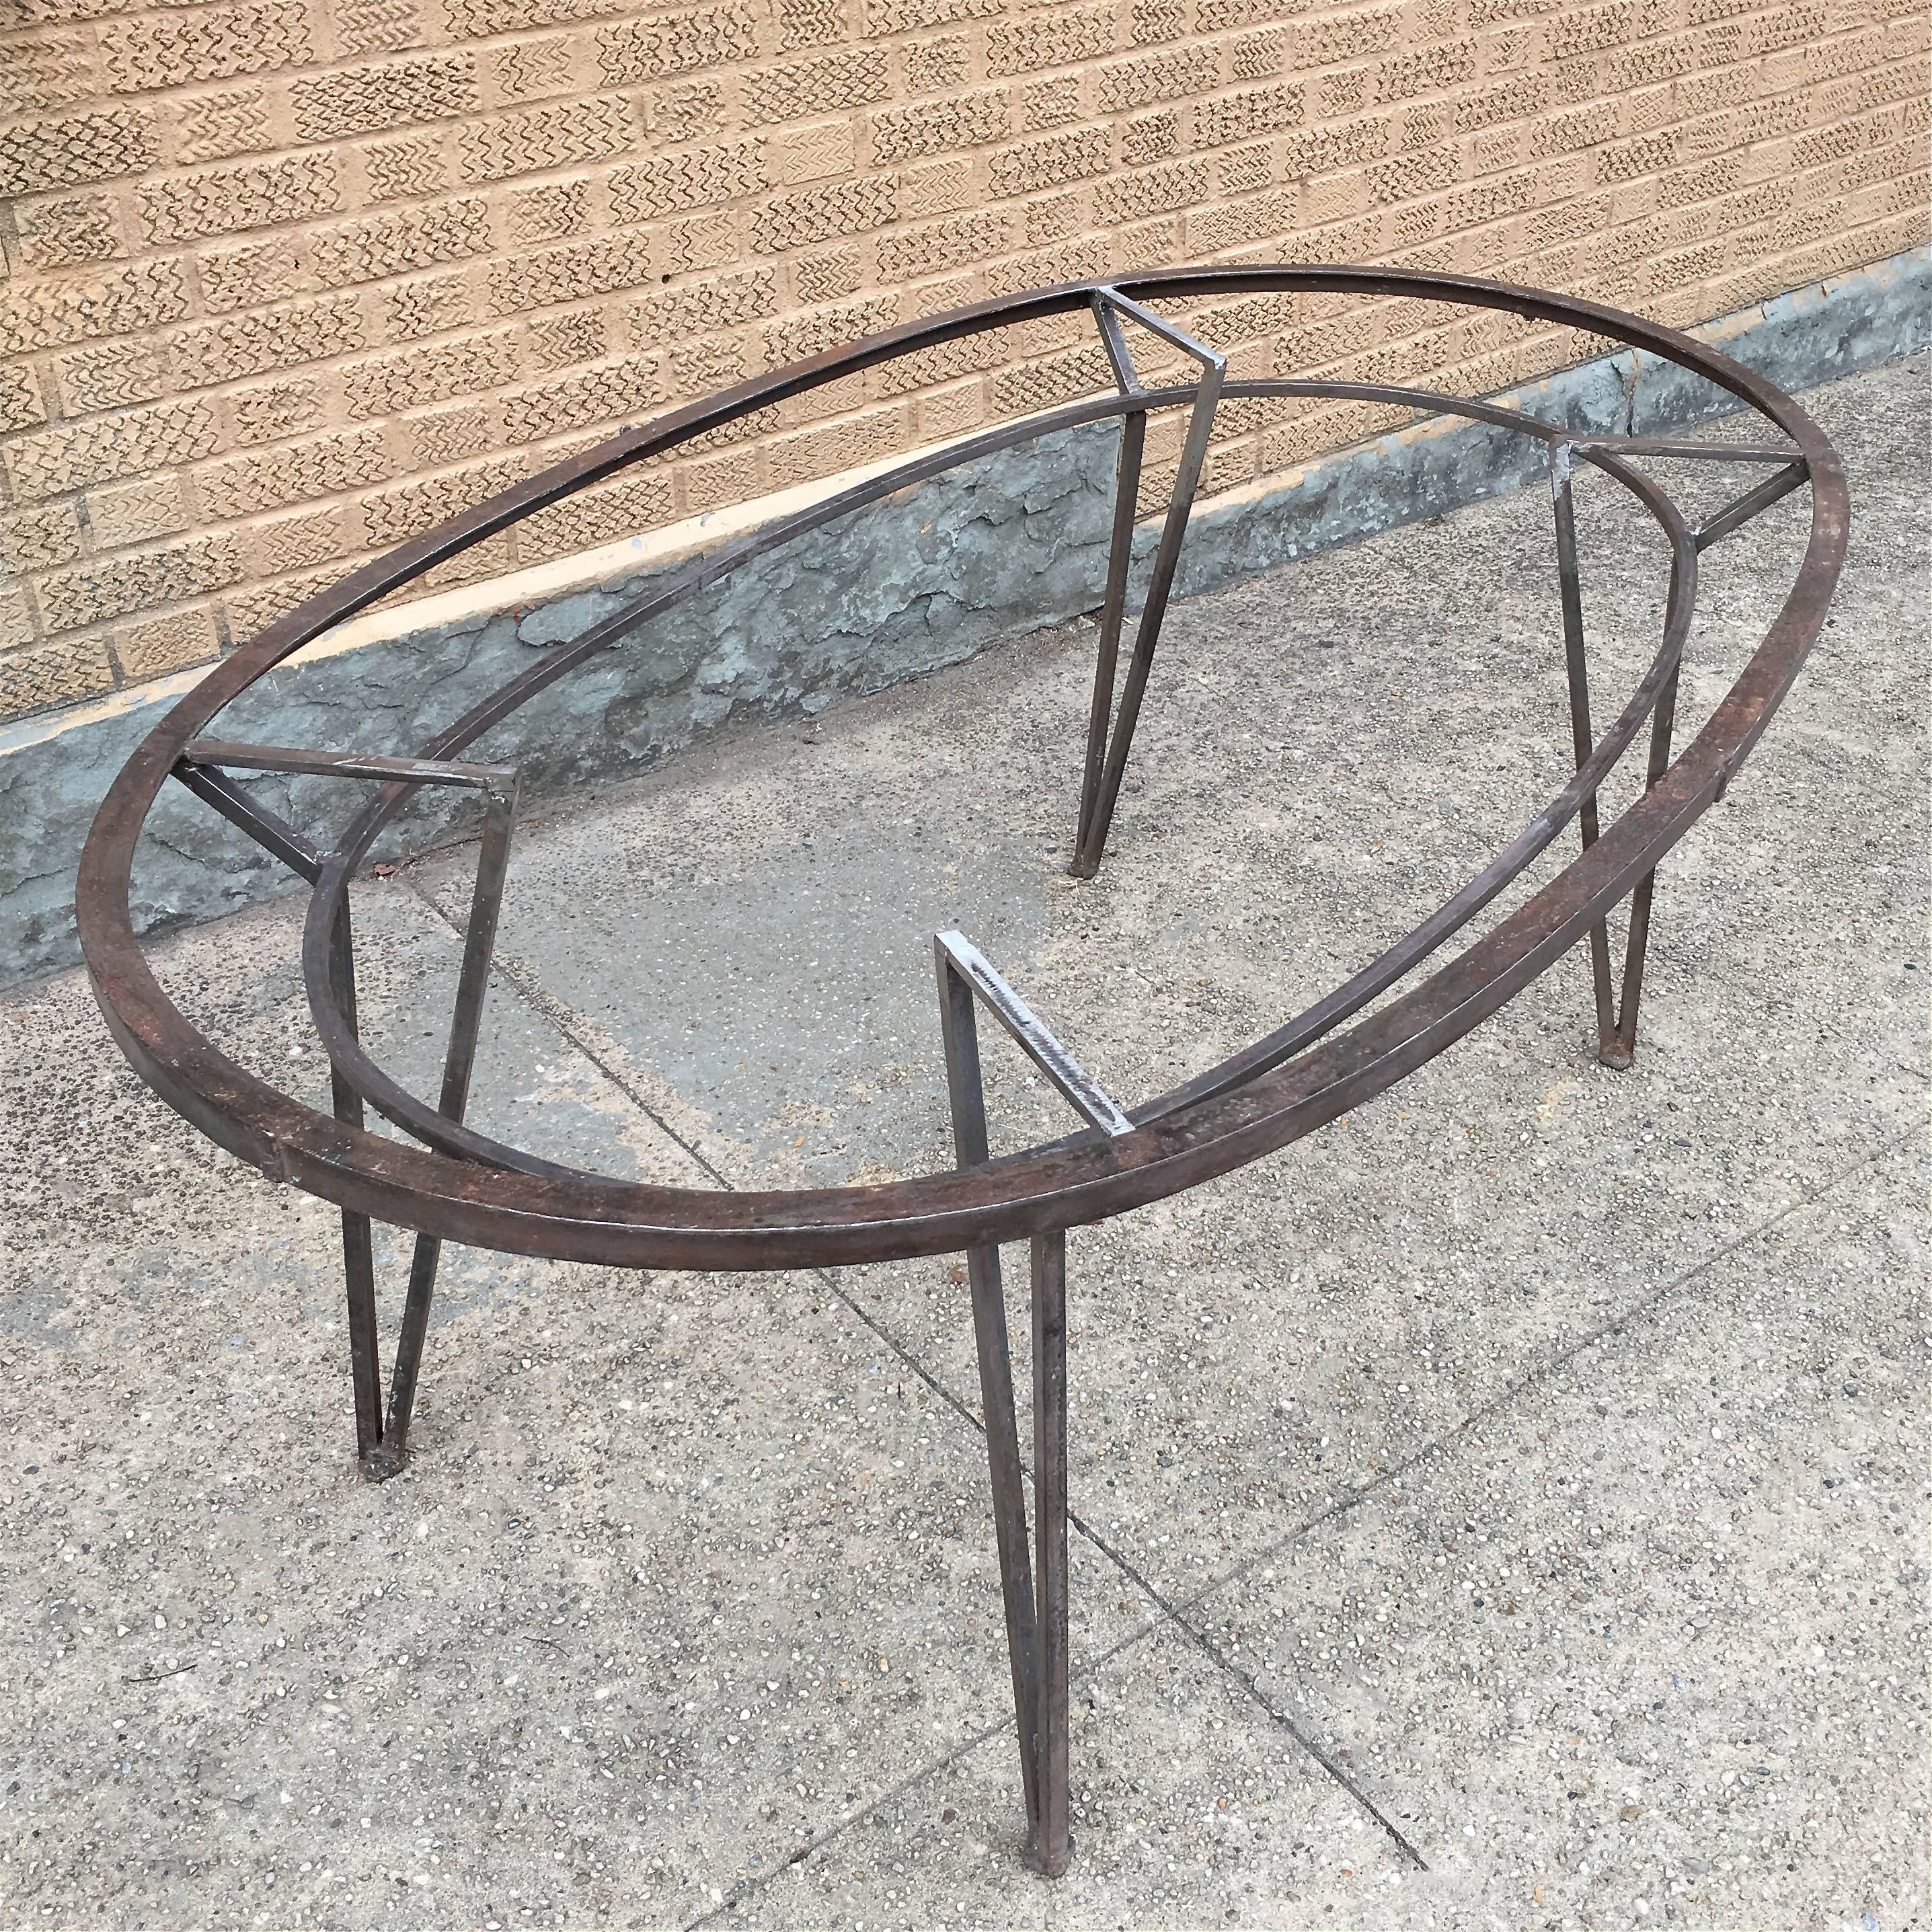 Mid-Century, architectural, brushed steel, oval, indoor/outdoor dining table with 1/2″ thick glass top (not shown.)